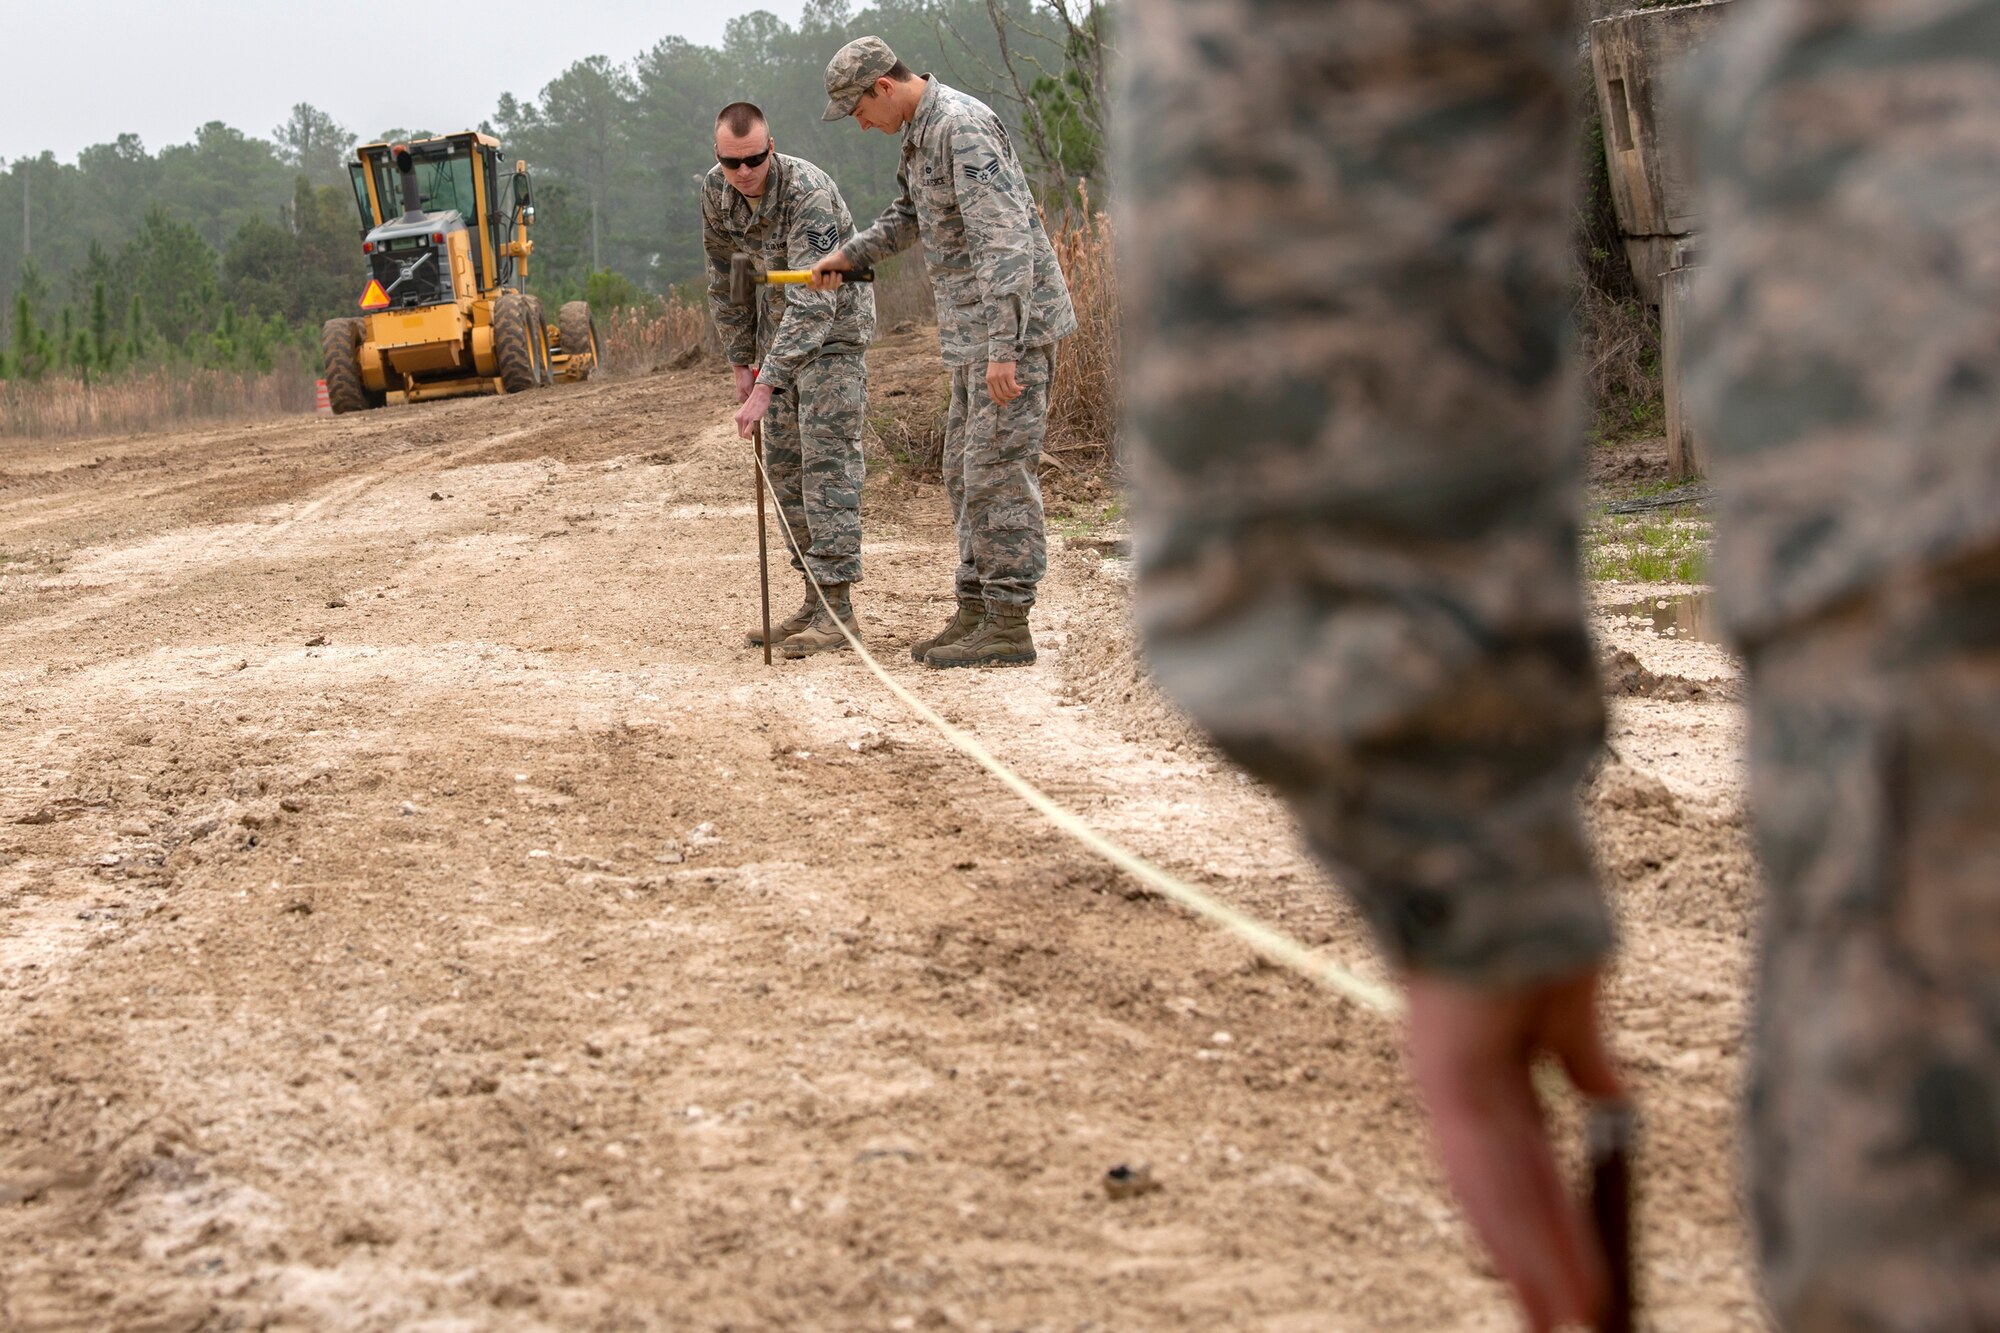 Airmen from the 23d Civil Engineer Squadron measure out the perimeter for a bern, Feb. 15, 2018, at Moody Air Force Base, Ga. Airmen from the 23d CES participated in a Prime Base Engineer Emergency Force training day to prepare for some of the wartime tasks they could encounter while in a deployed environment. (U.S. Air Force photo by Airman Eugene Oliver)